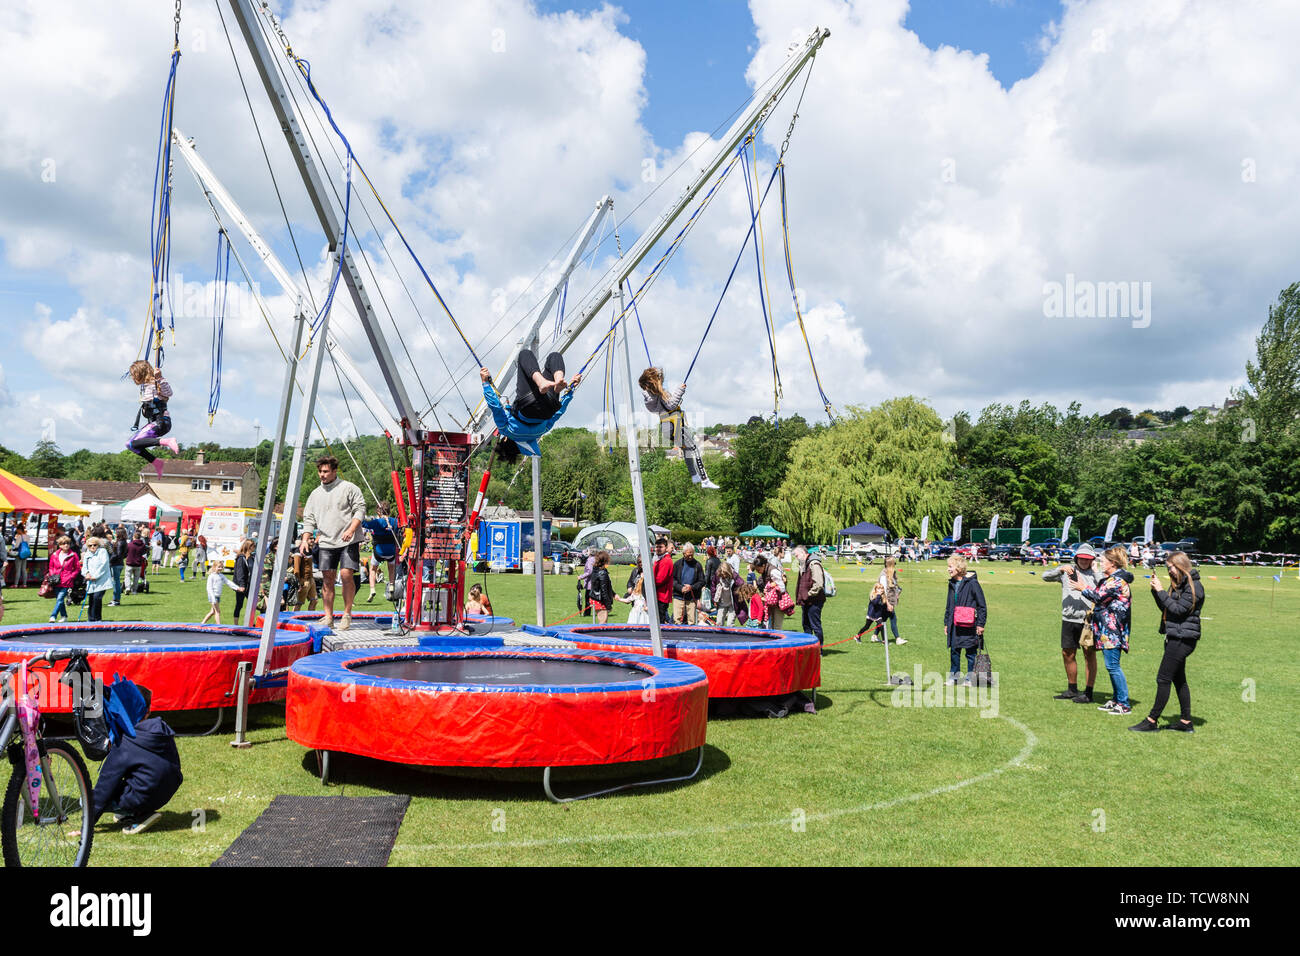 Children bouncing and somersaulting on a bungee trampoline while adults watch at the annual Bradford on Avon Lions funday Stock Photo